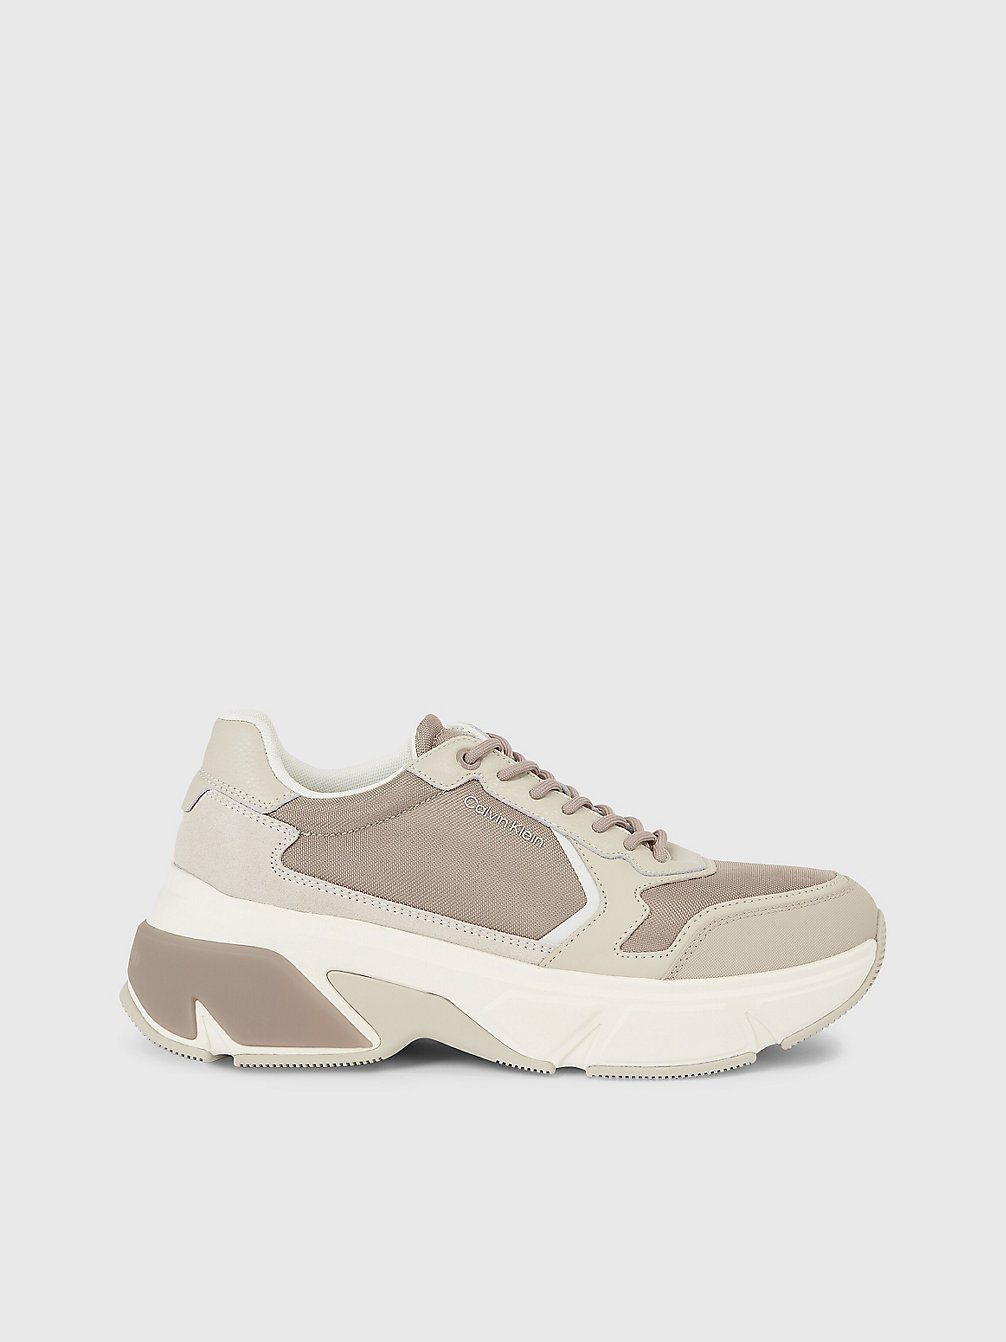 Chunky Sneaker In Pelle > FEATHER GREY MIX > undefined uomo > Calvin Klein